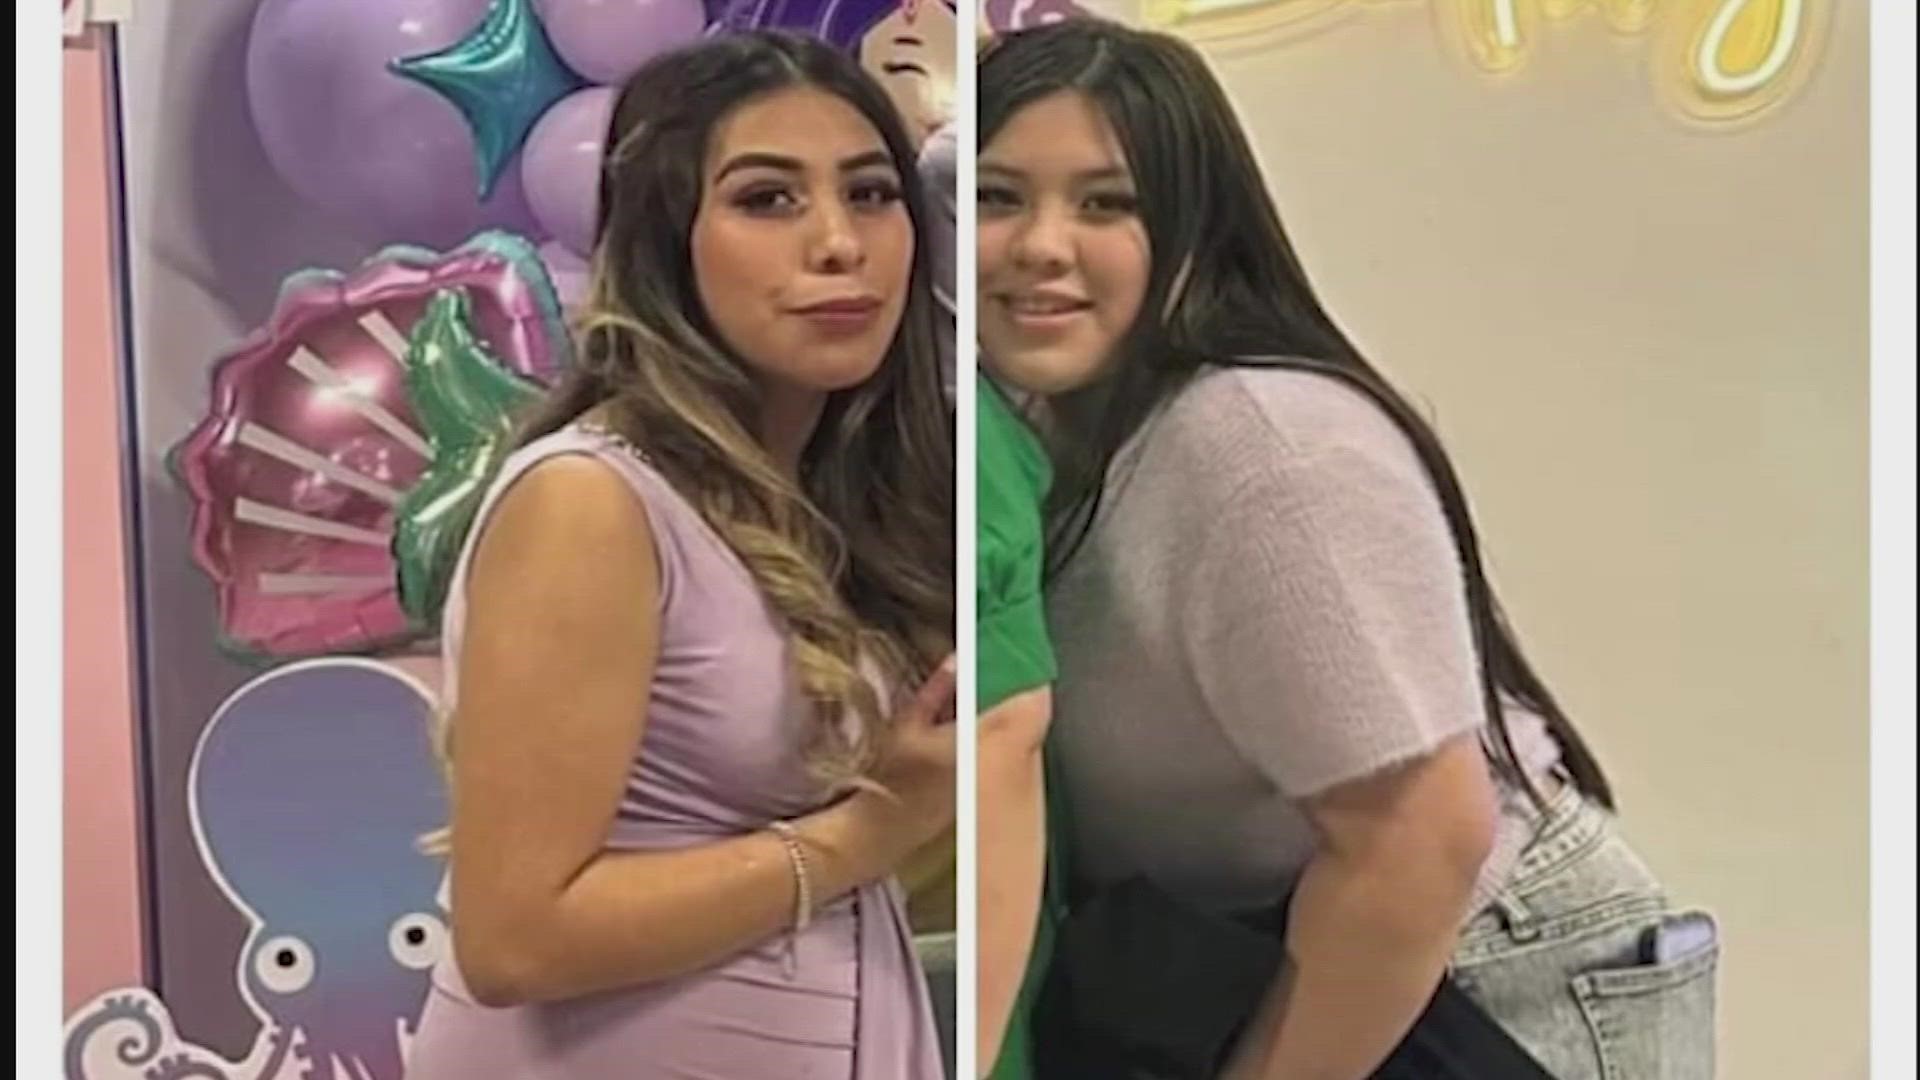 Family members said the victims were 19-year-old Sayuri Gill and her 13-year-old sister, Melany Torres. They said Gill was six months pregnant.